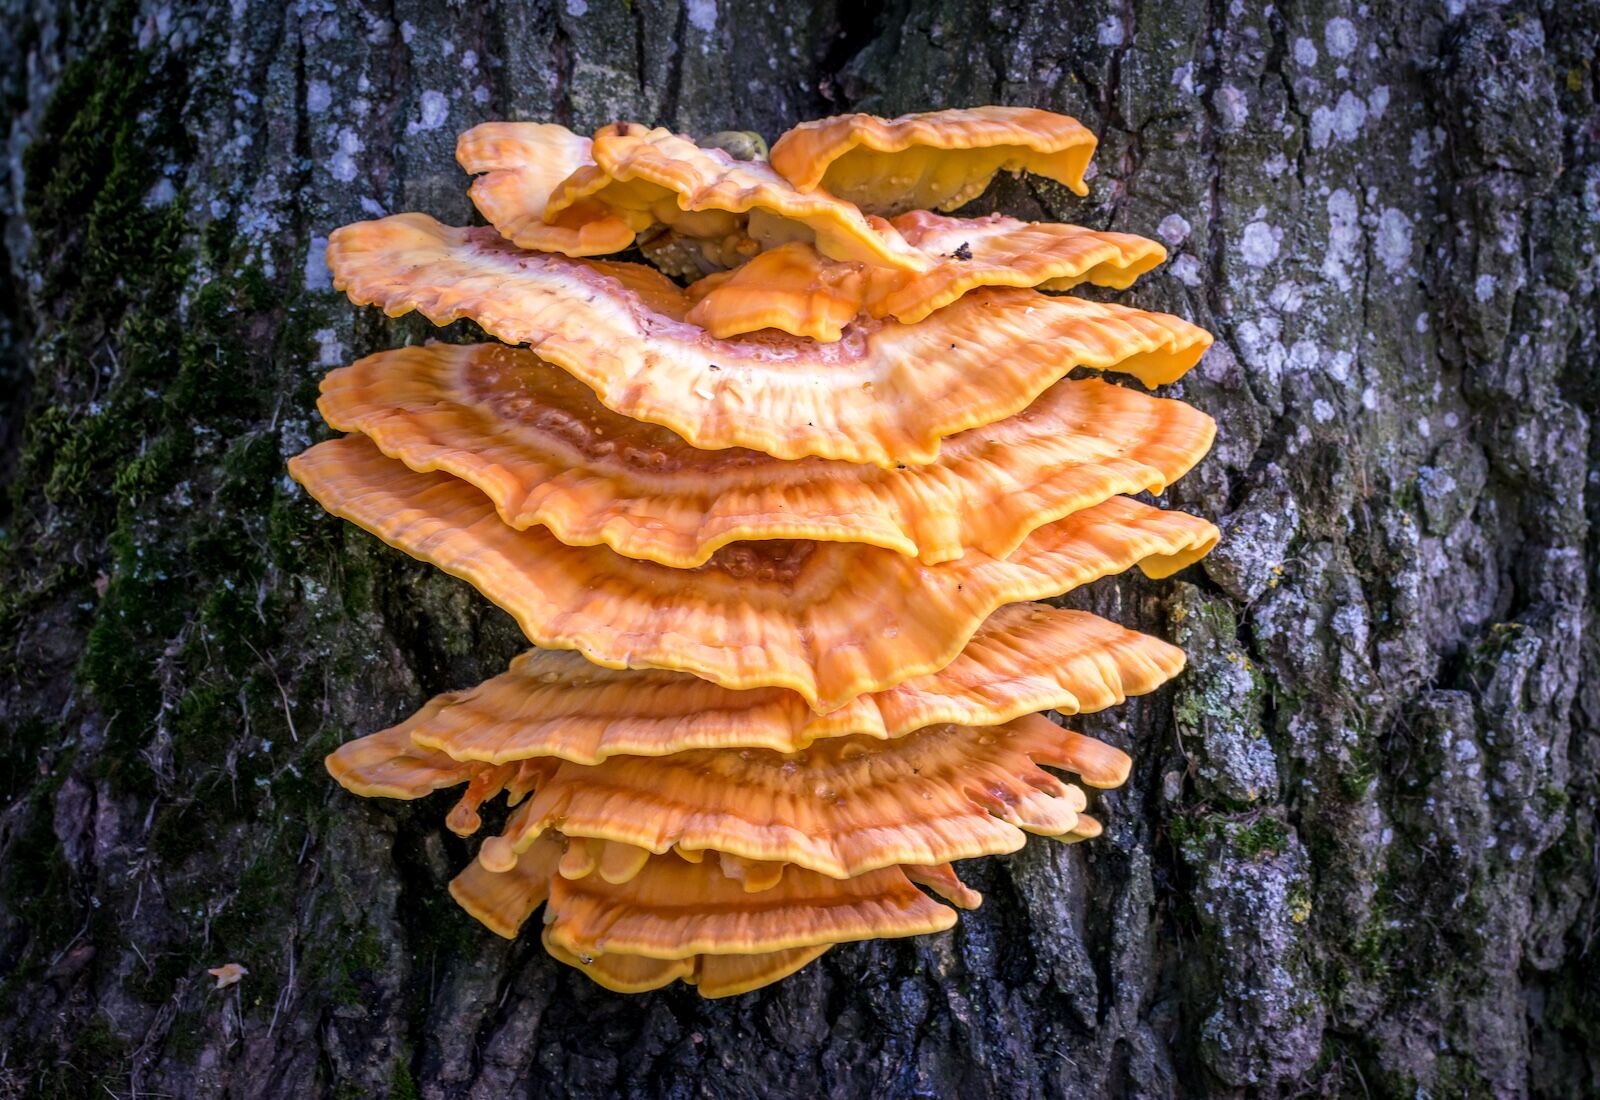 laetiporus or chicken of the woods growing on a tree, fungi, fungus, mushrooms.